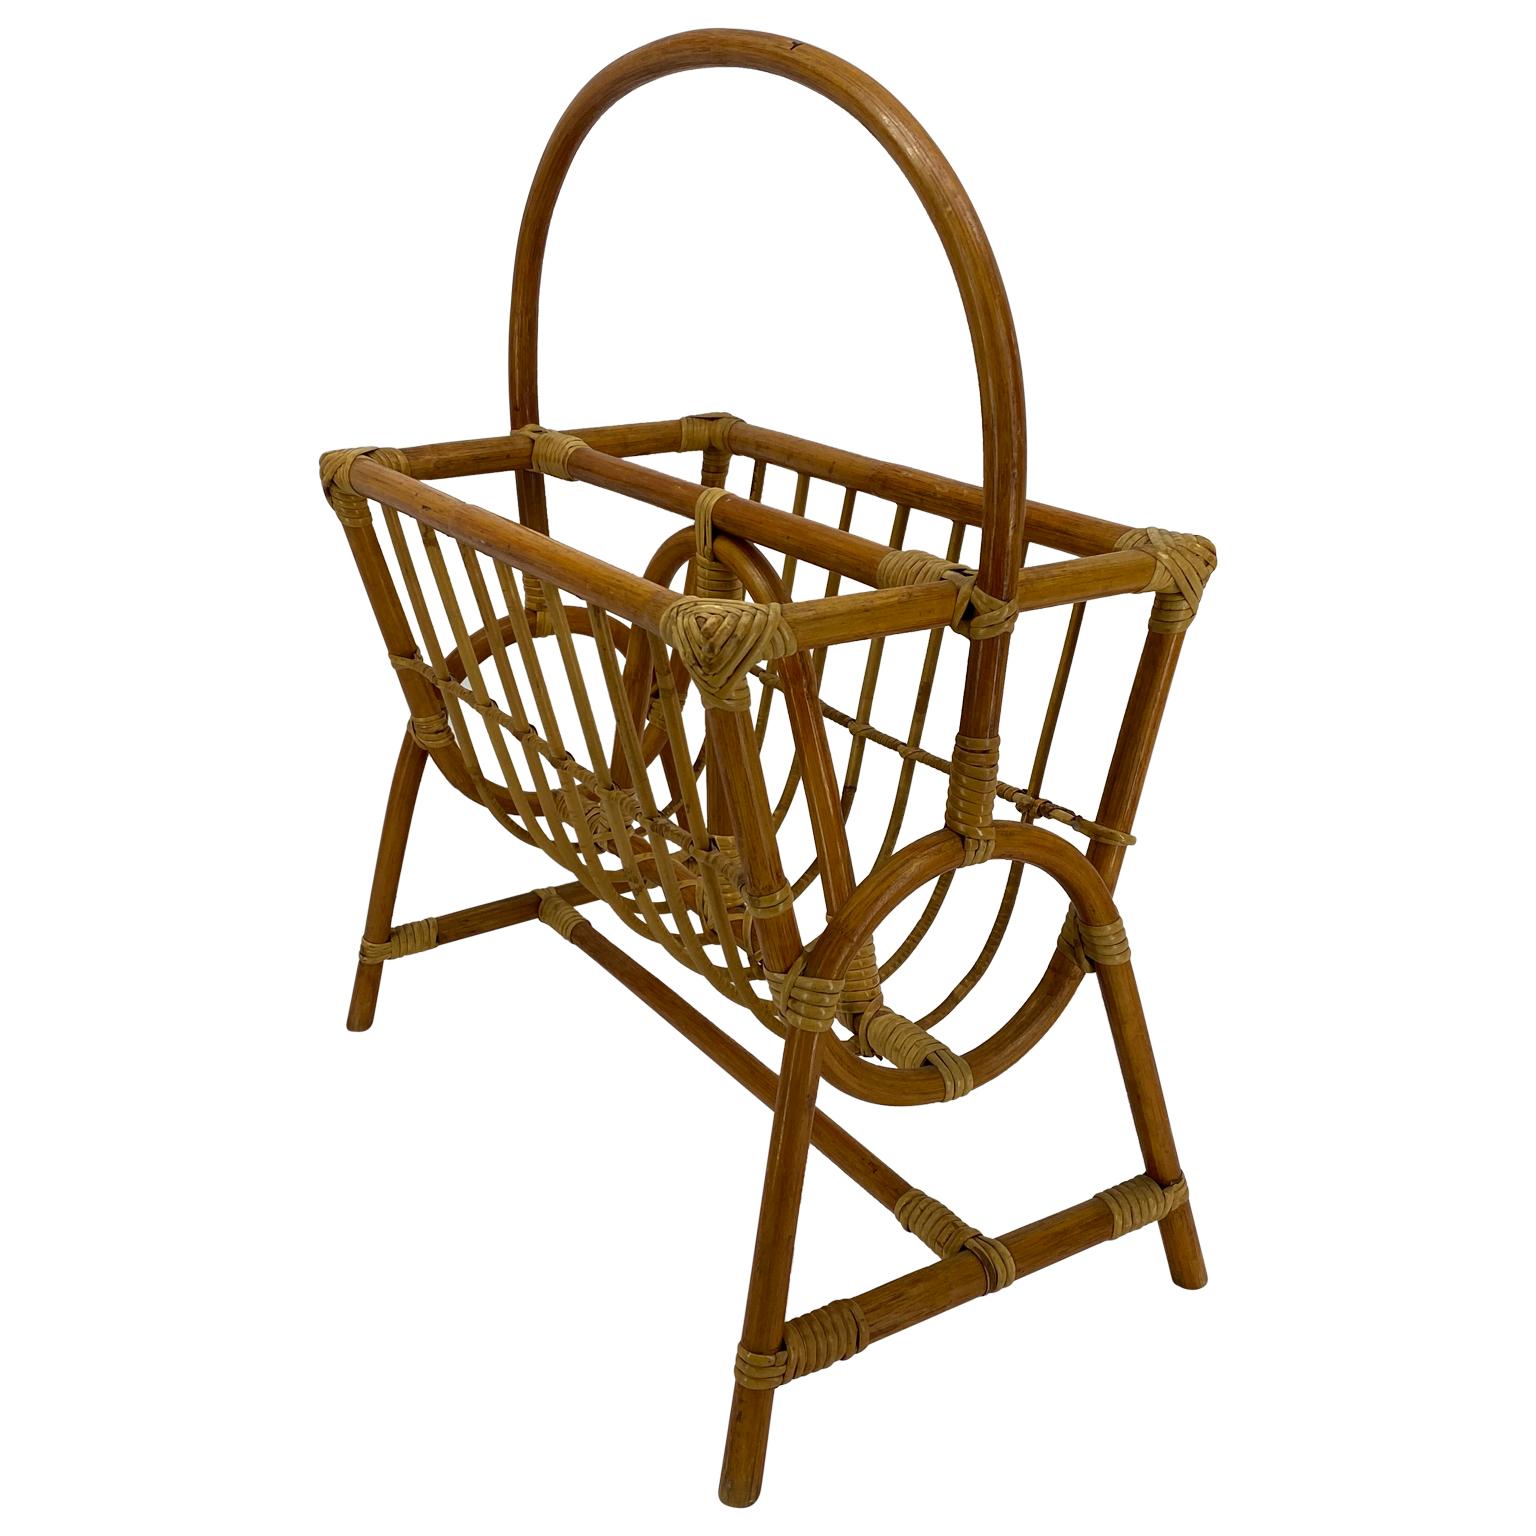 Mid-Century Modern Franco Albini style rattan and bamboo magazine rack. This classic style of the mid-century period is a lovely addition to your indoor or outdoor decor. In very good condition, the rattan shines in the light and is functional and